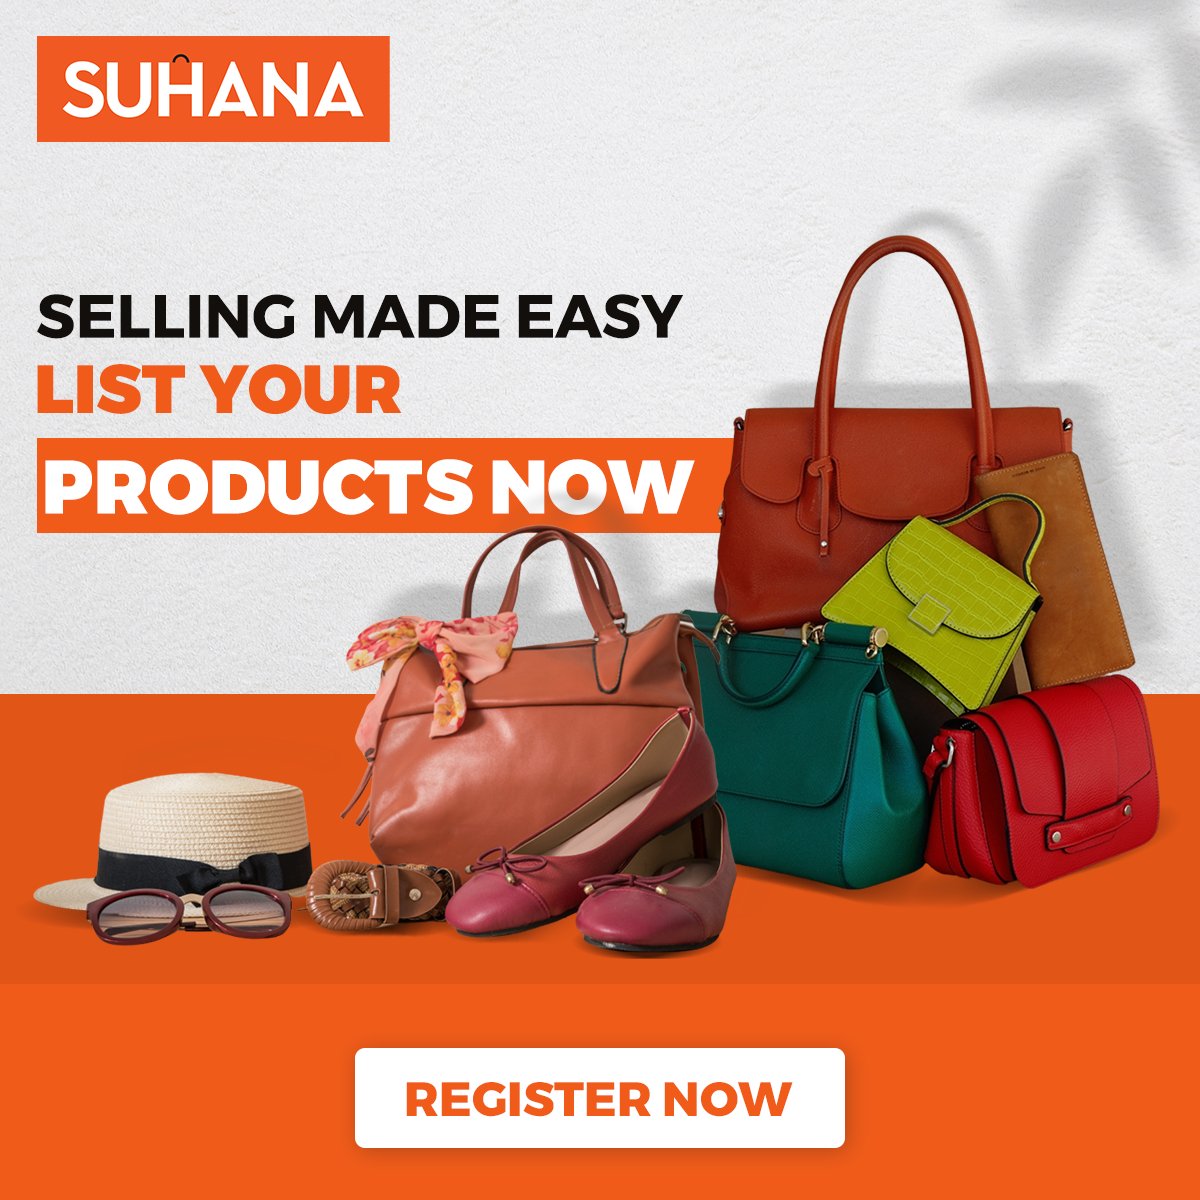 Looking for a reliable platform to sell your products? Look no further than Suhana Shop! We offer a seamless selling experience, with easy product listing and secure payment processing.

Register Now: suhanashop.com/sellers/regist…

#SuhanaShop #SellWithSuhana #ProductListing